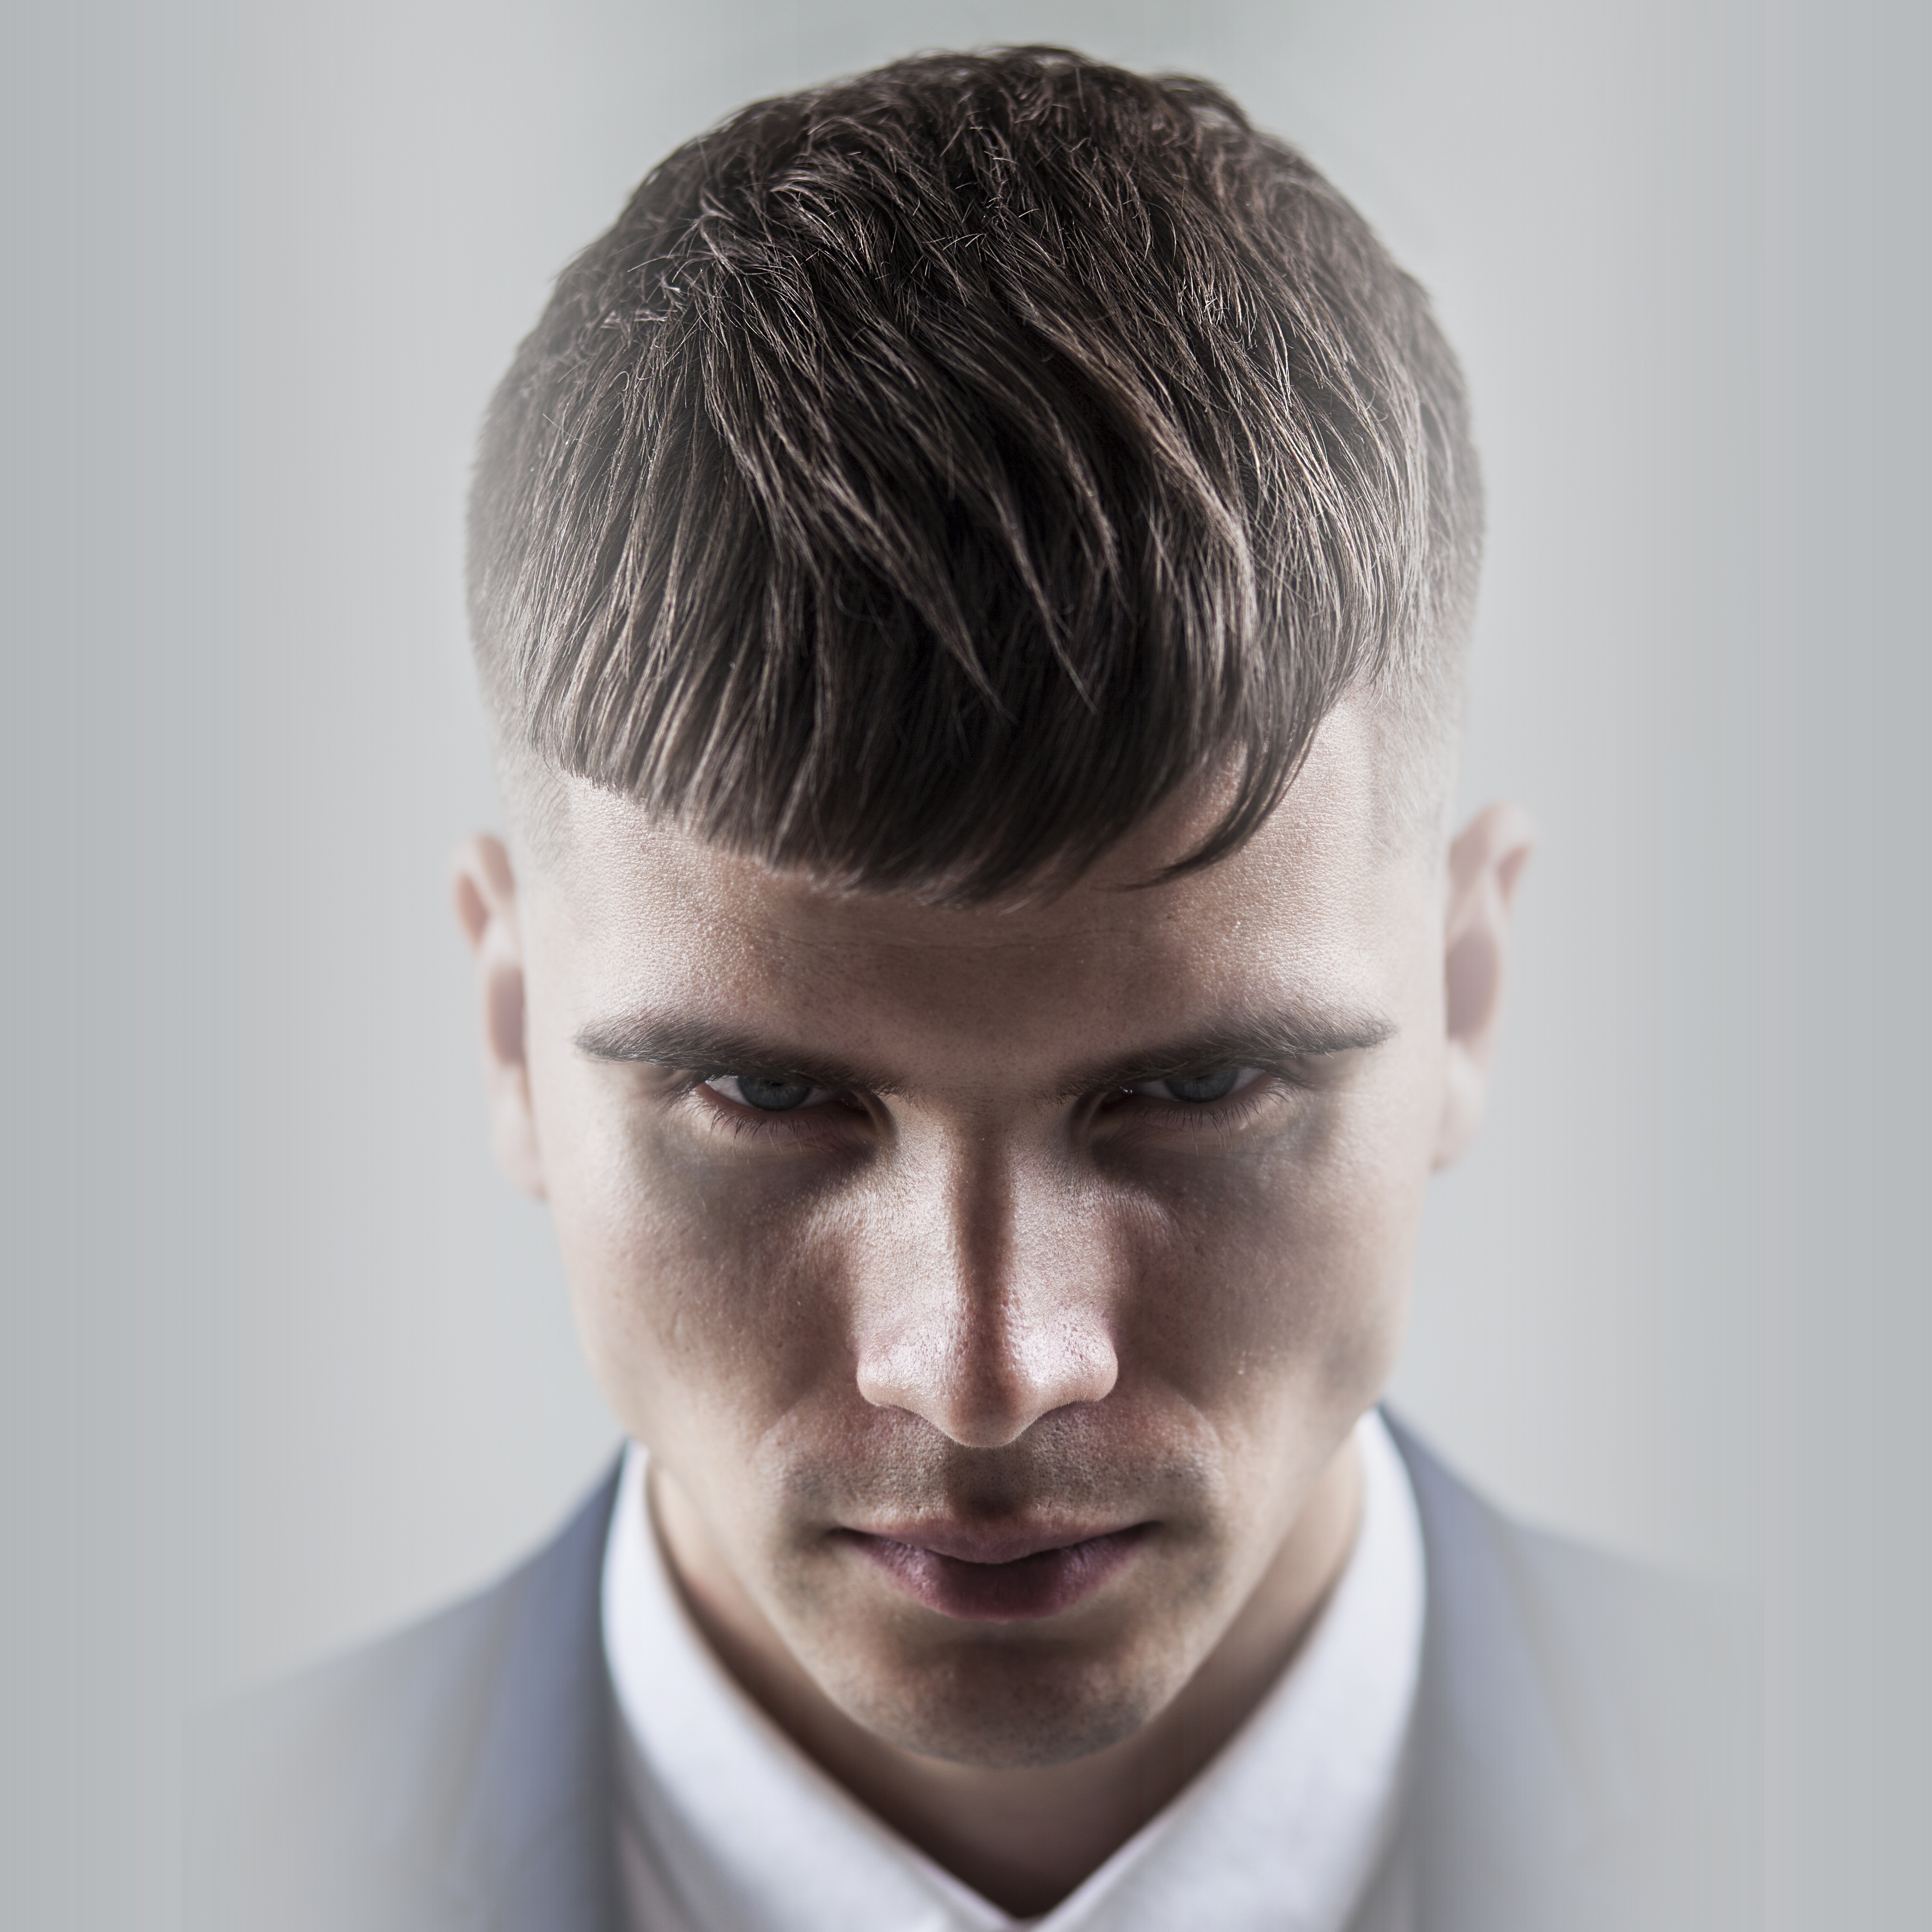 Male model wearing suit jacket and white shirt with mid-fade haircut with lightly textured crop by Andis clippers.